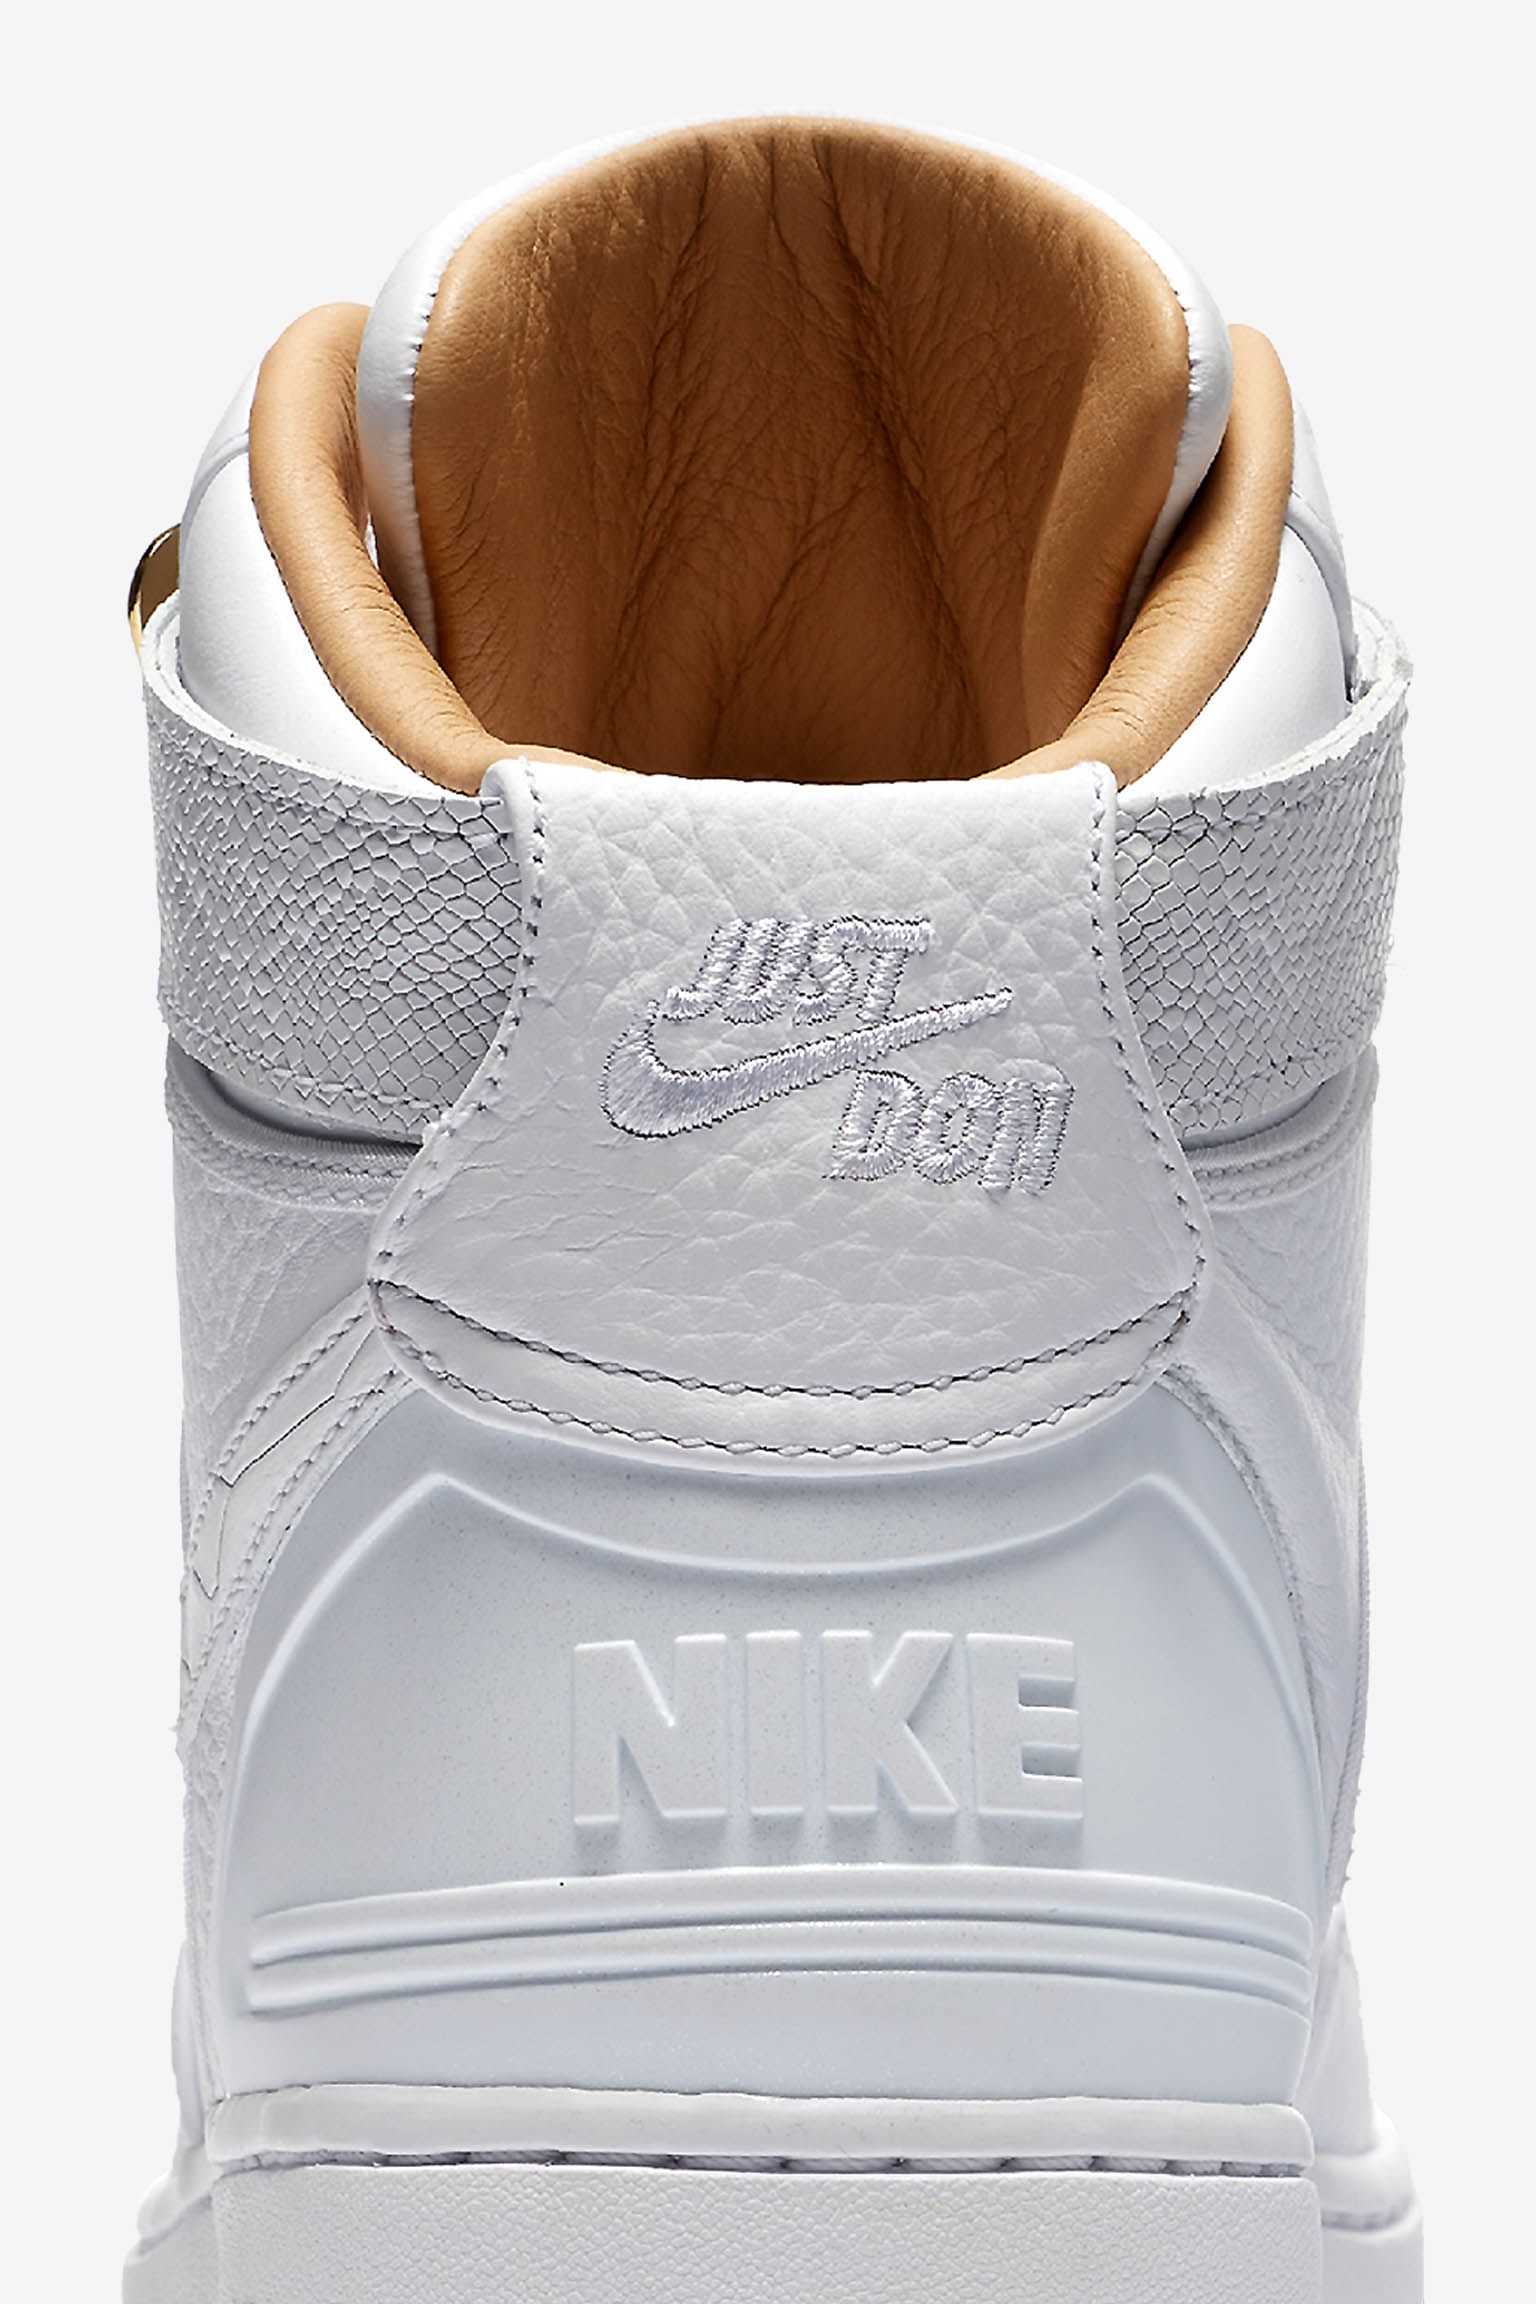 nike just don